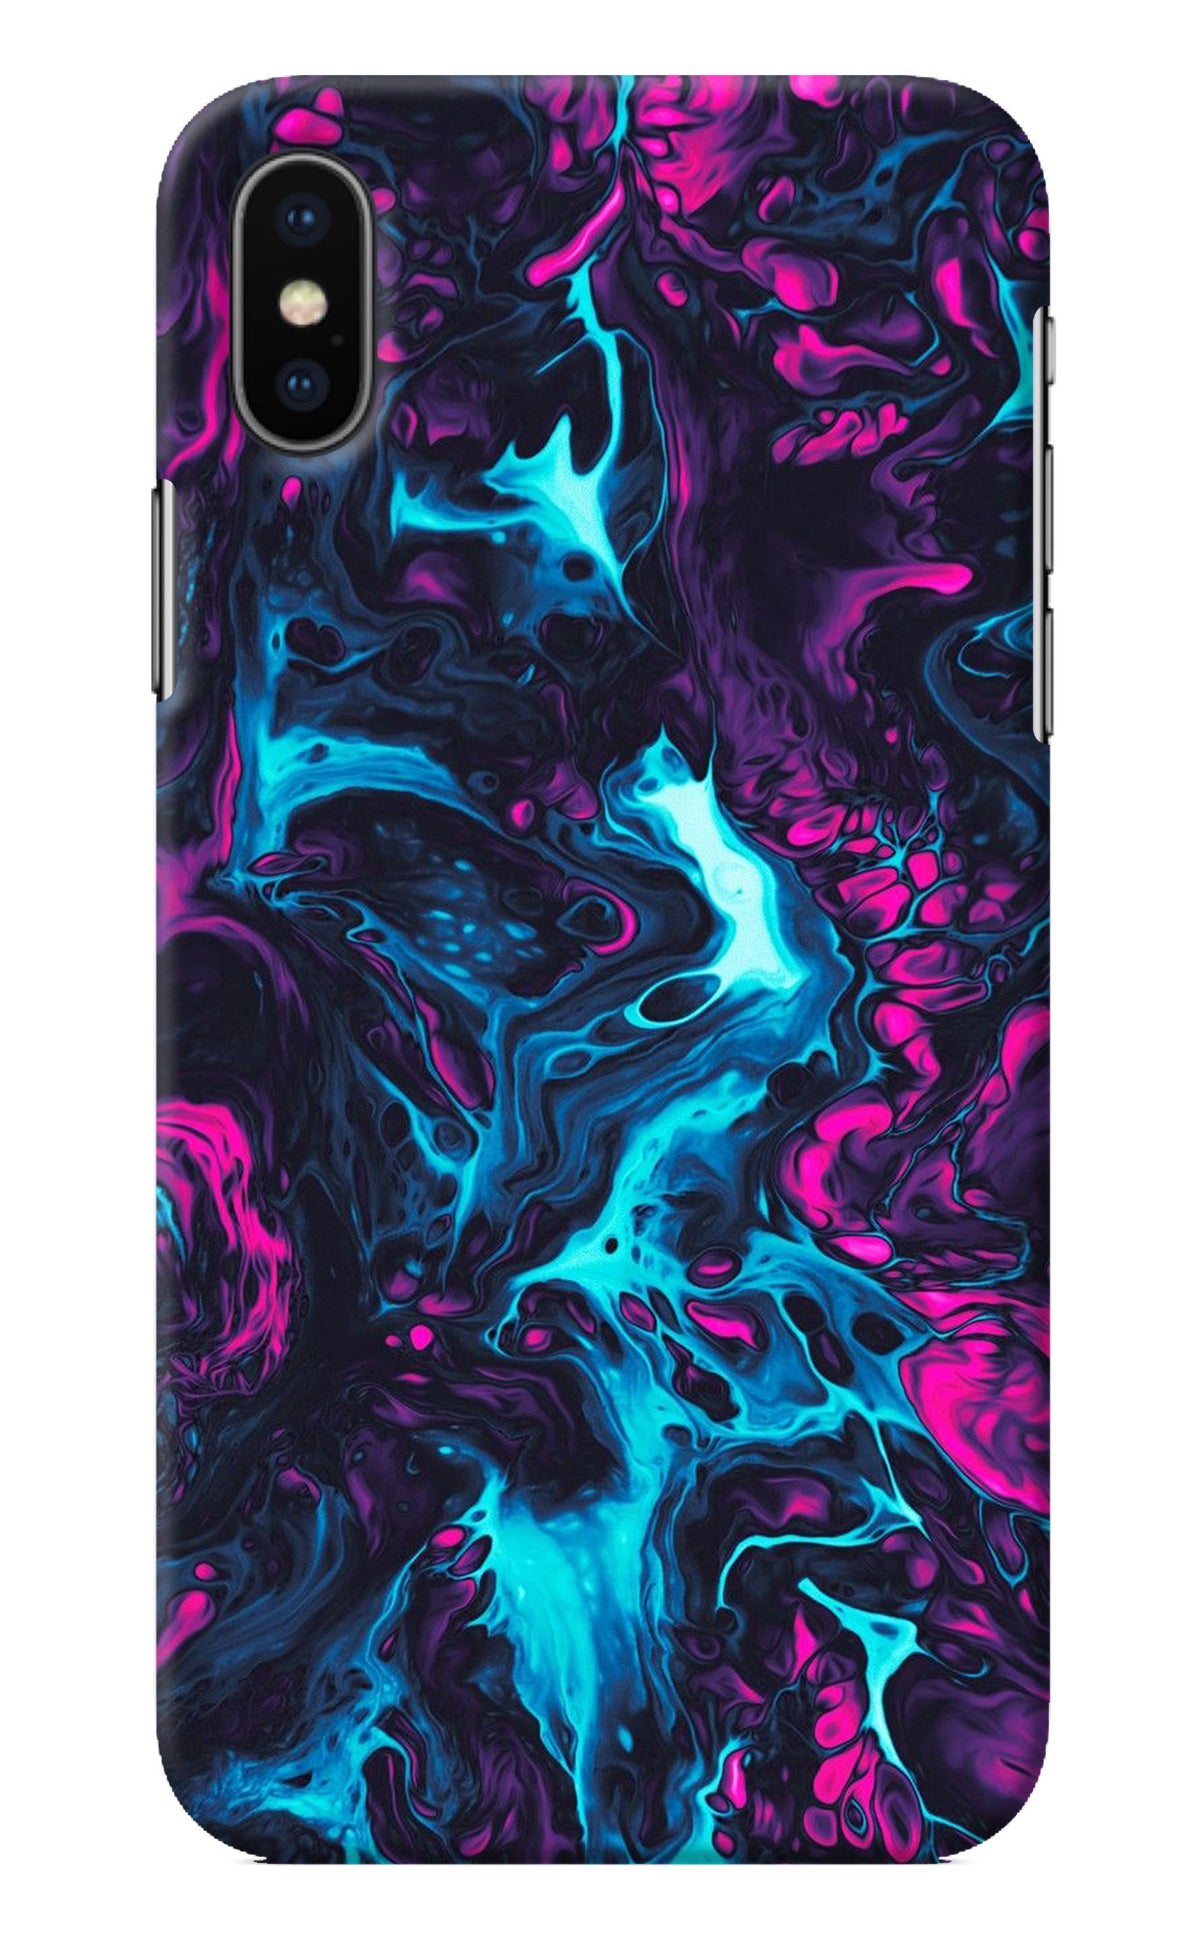 Abstract iPhone XS Back Cover